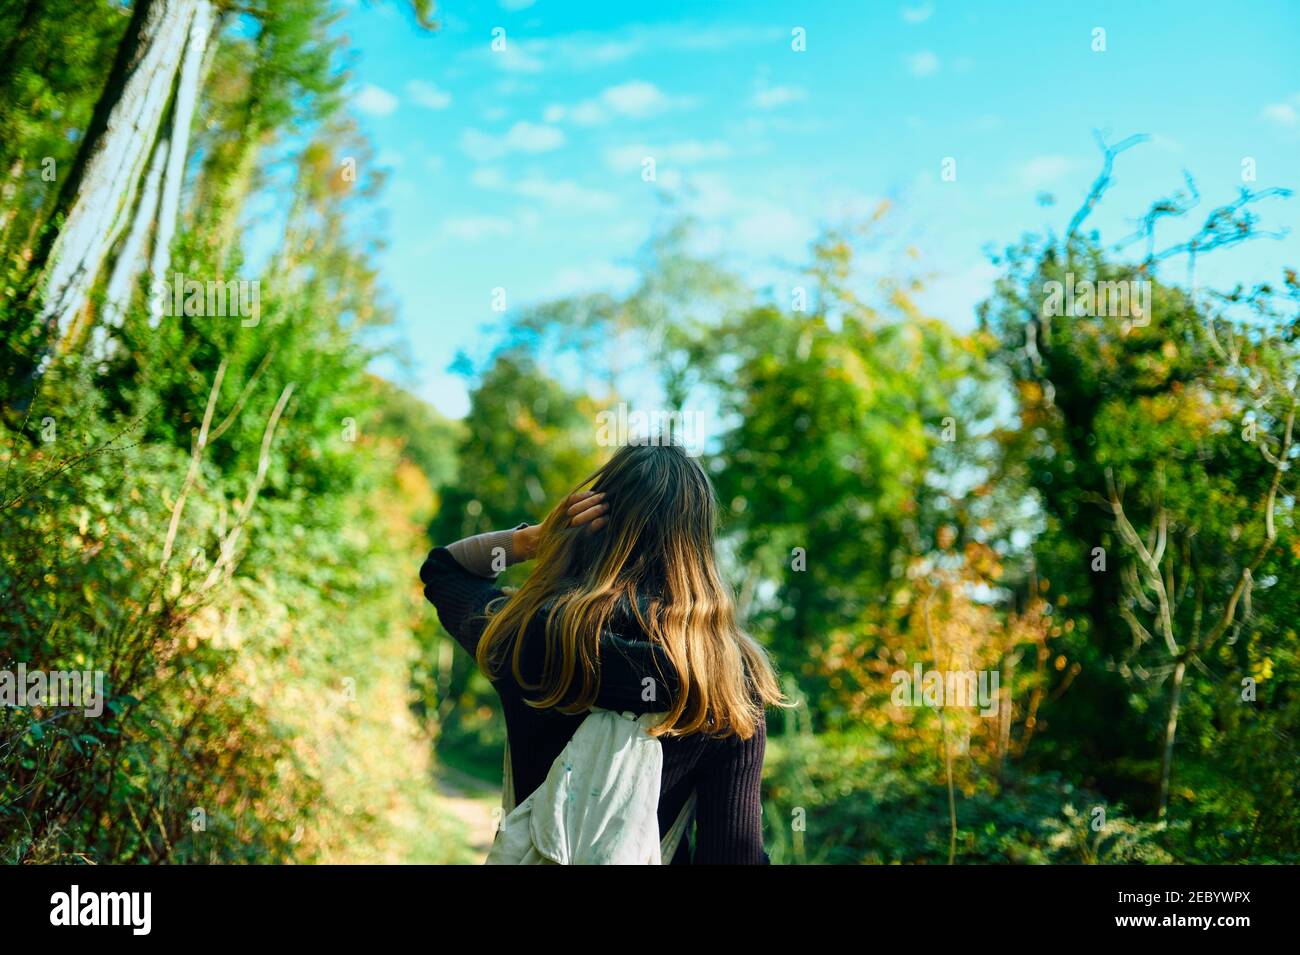 A young woman is walking in the woods on a sunny autumn day Stock Photo